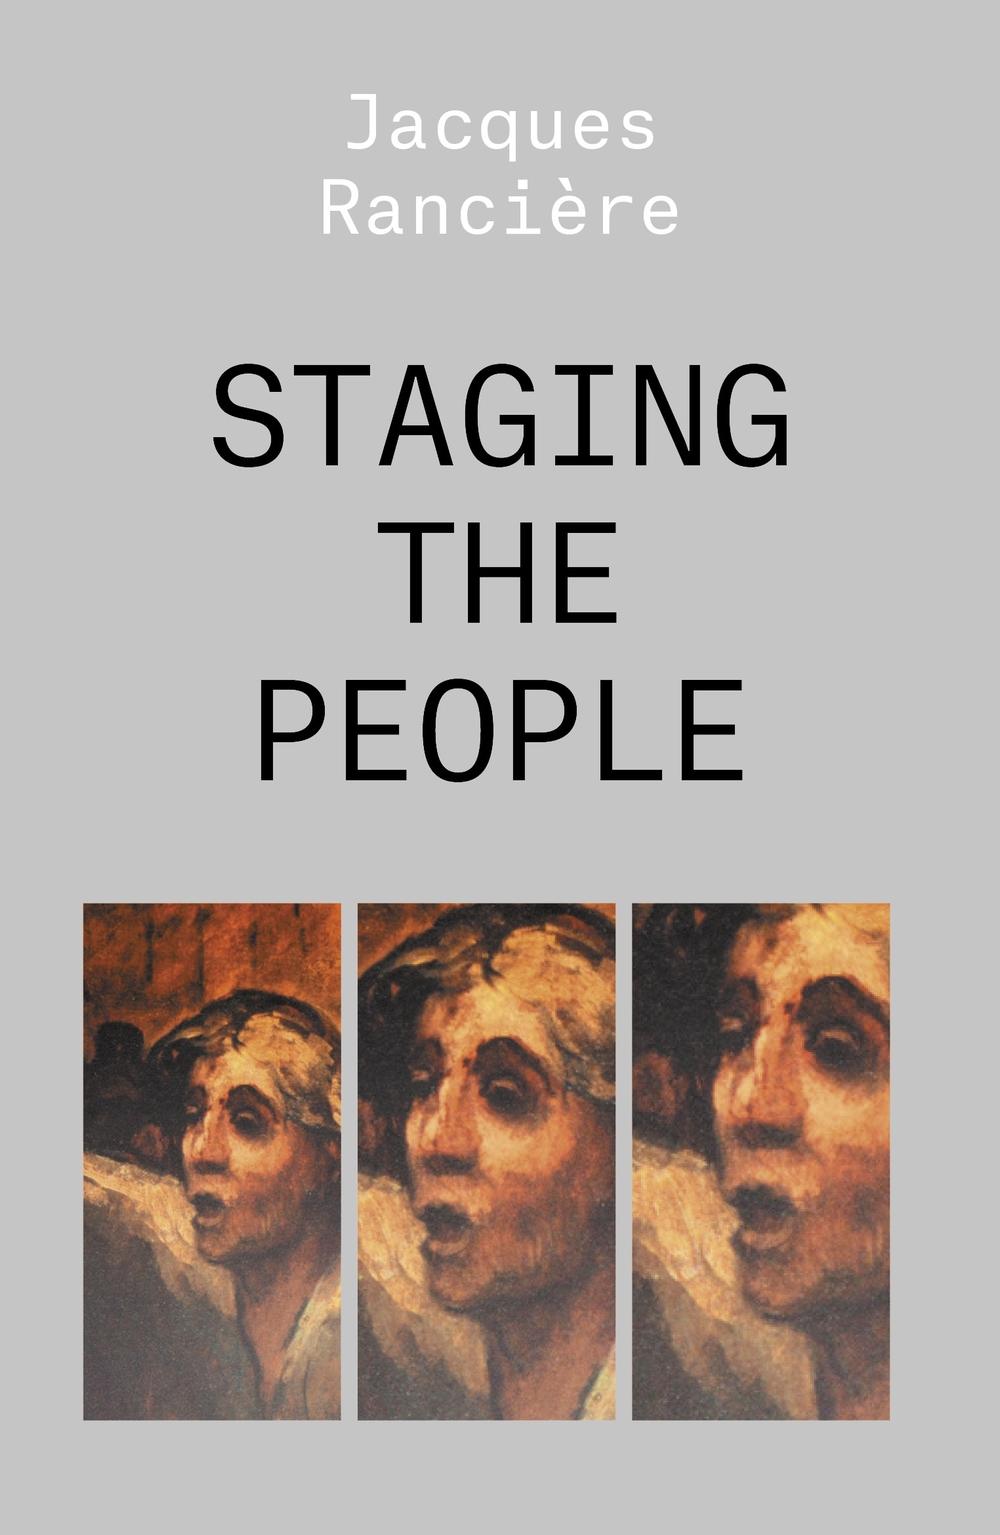 Staging the People - Jacques Ranci�re